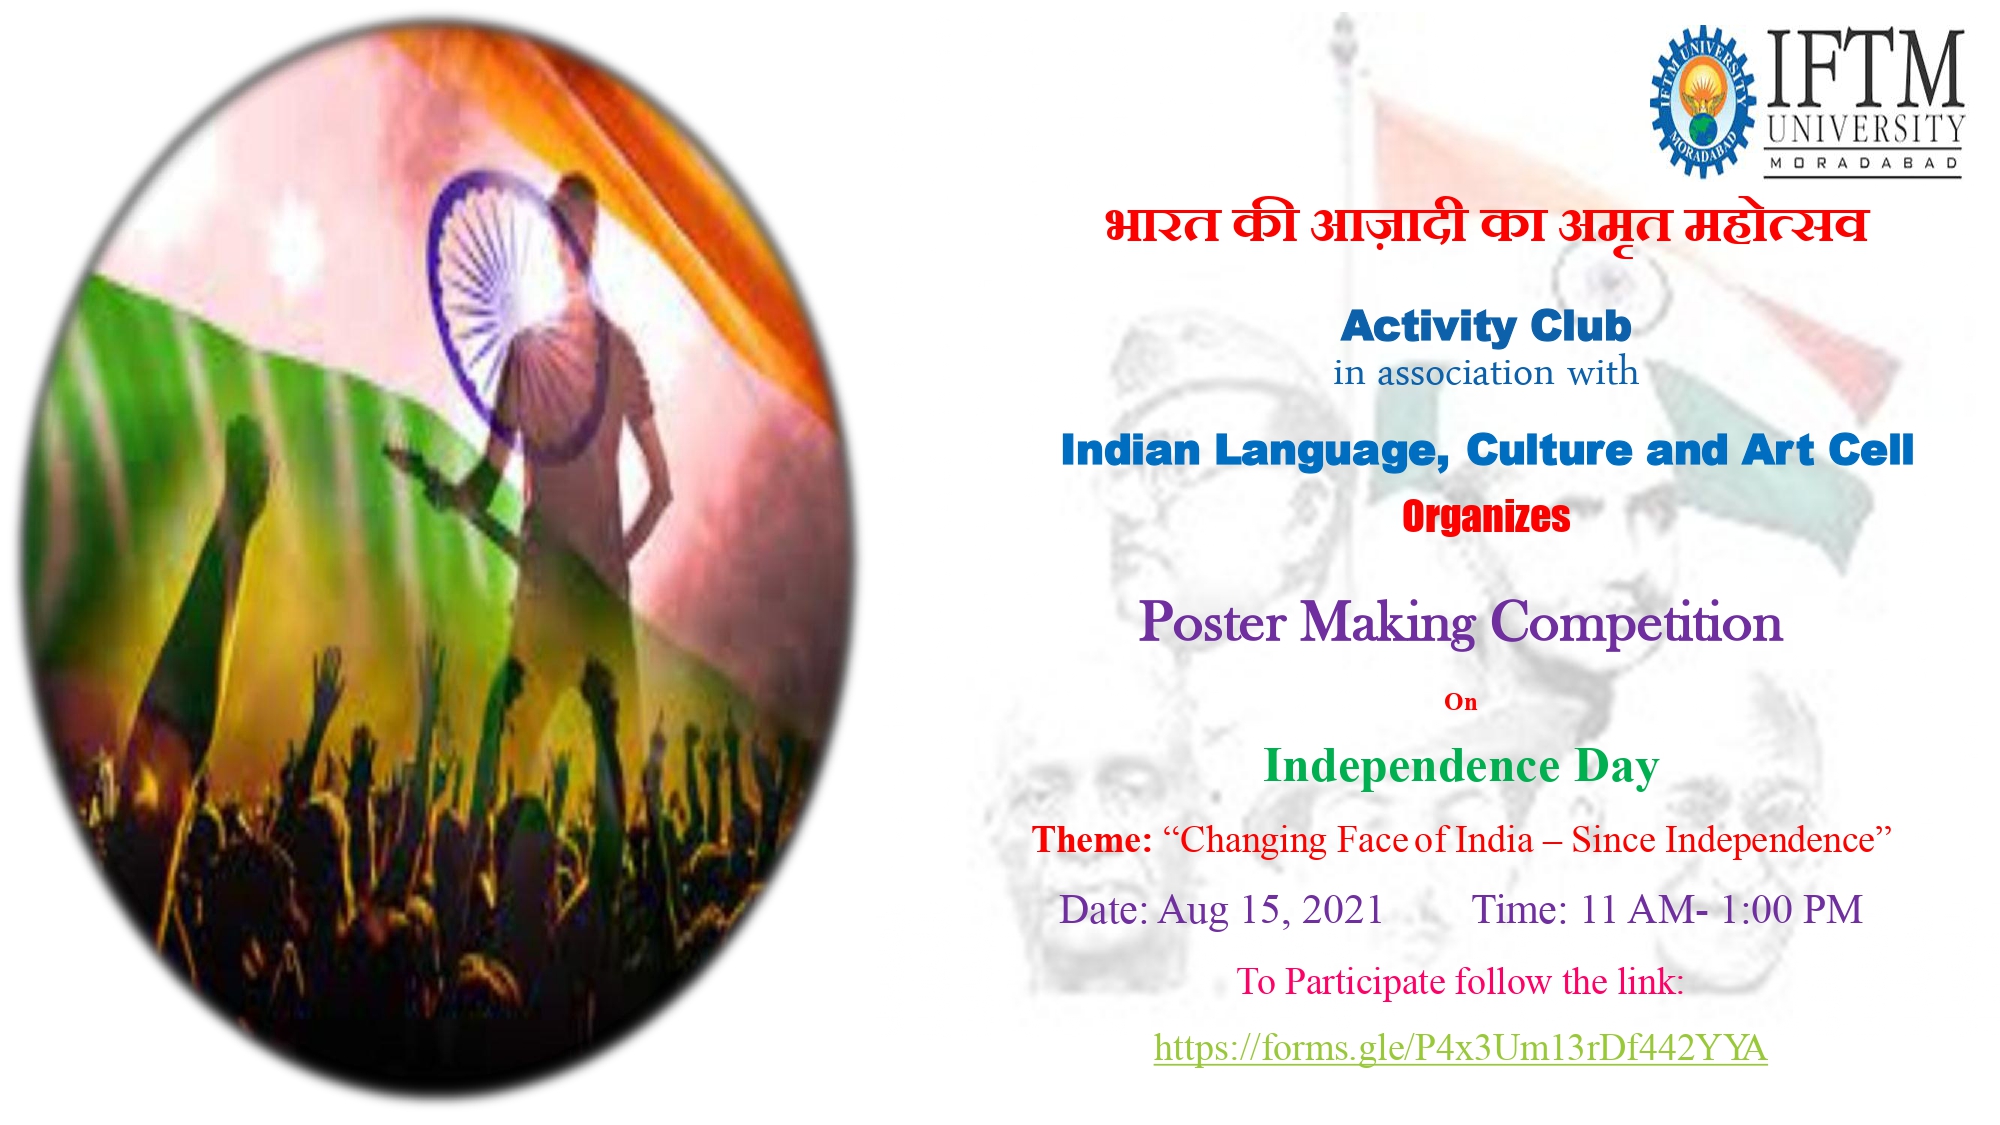 Poster Making Competition on Independence Day